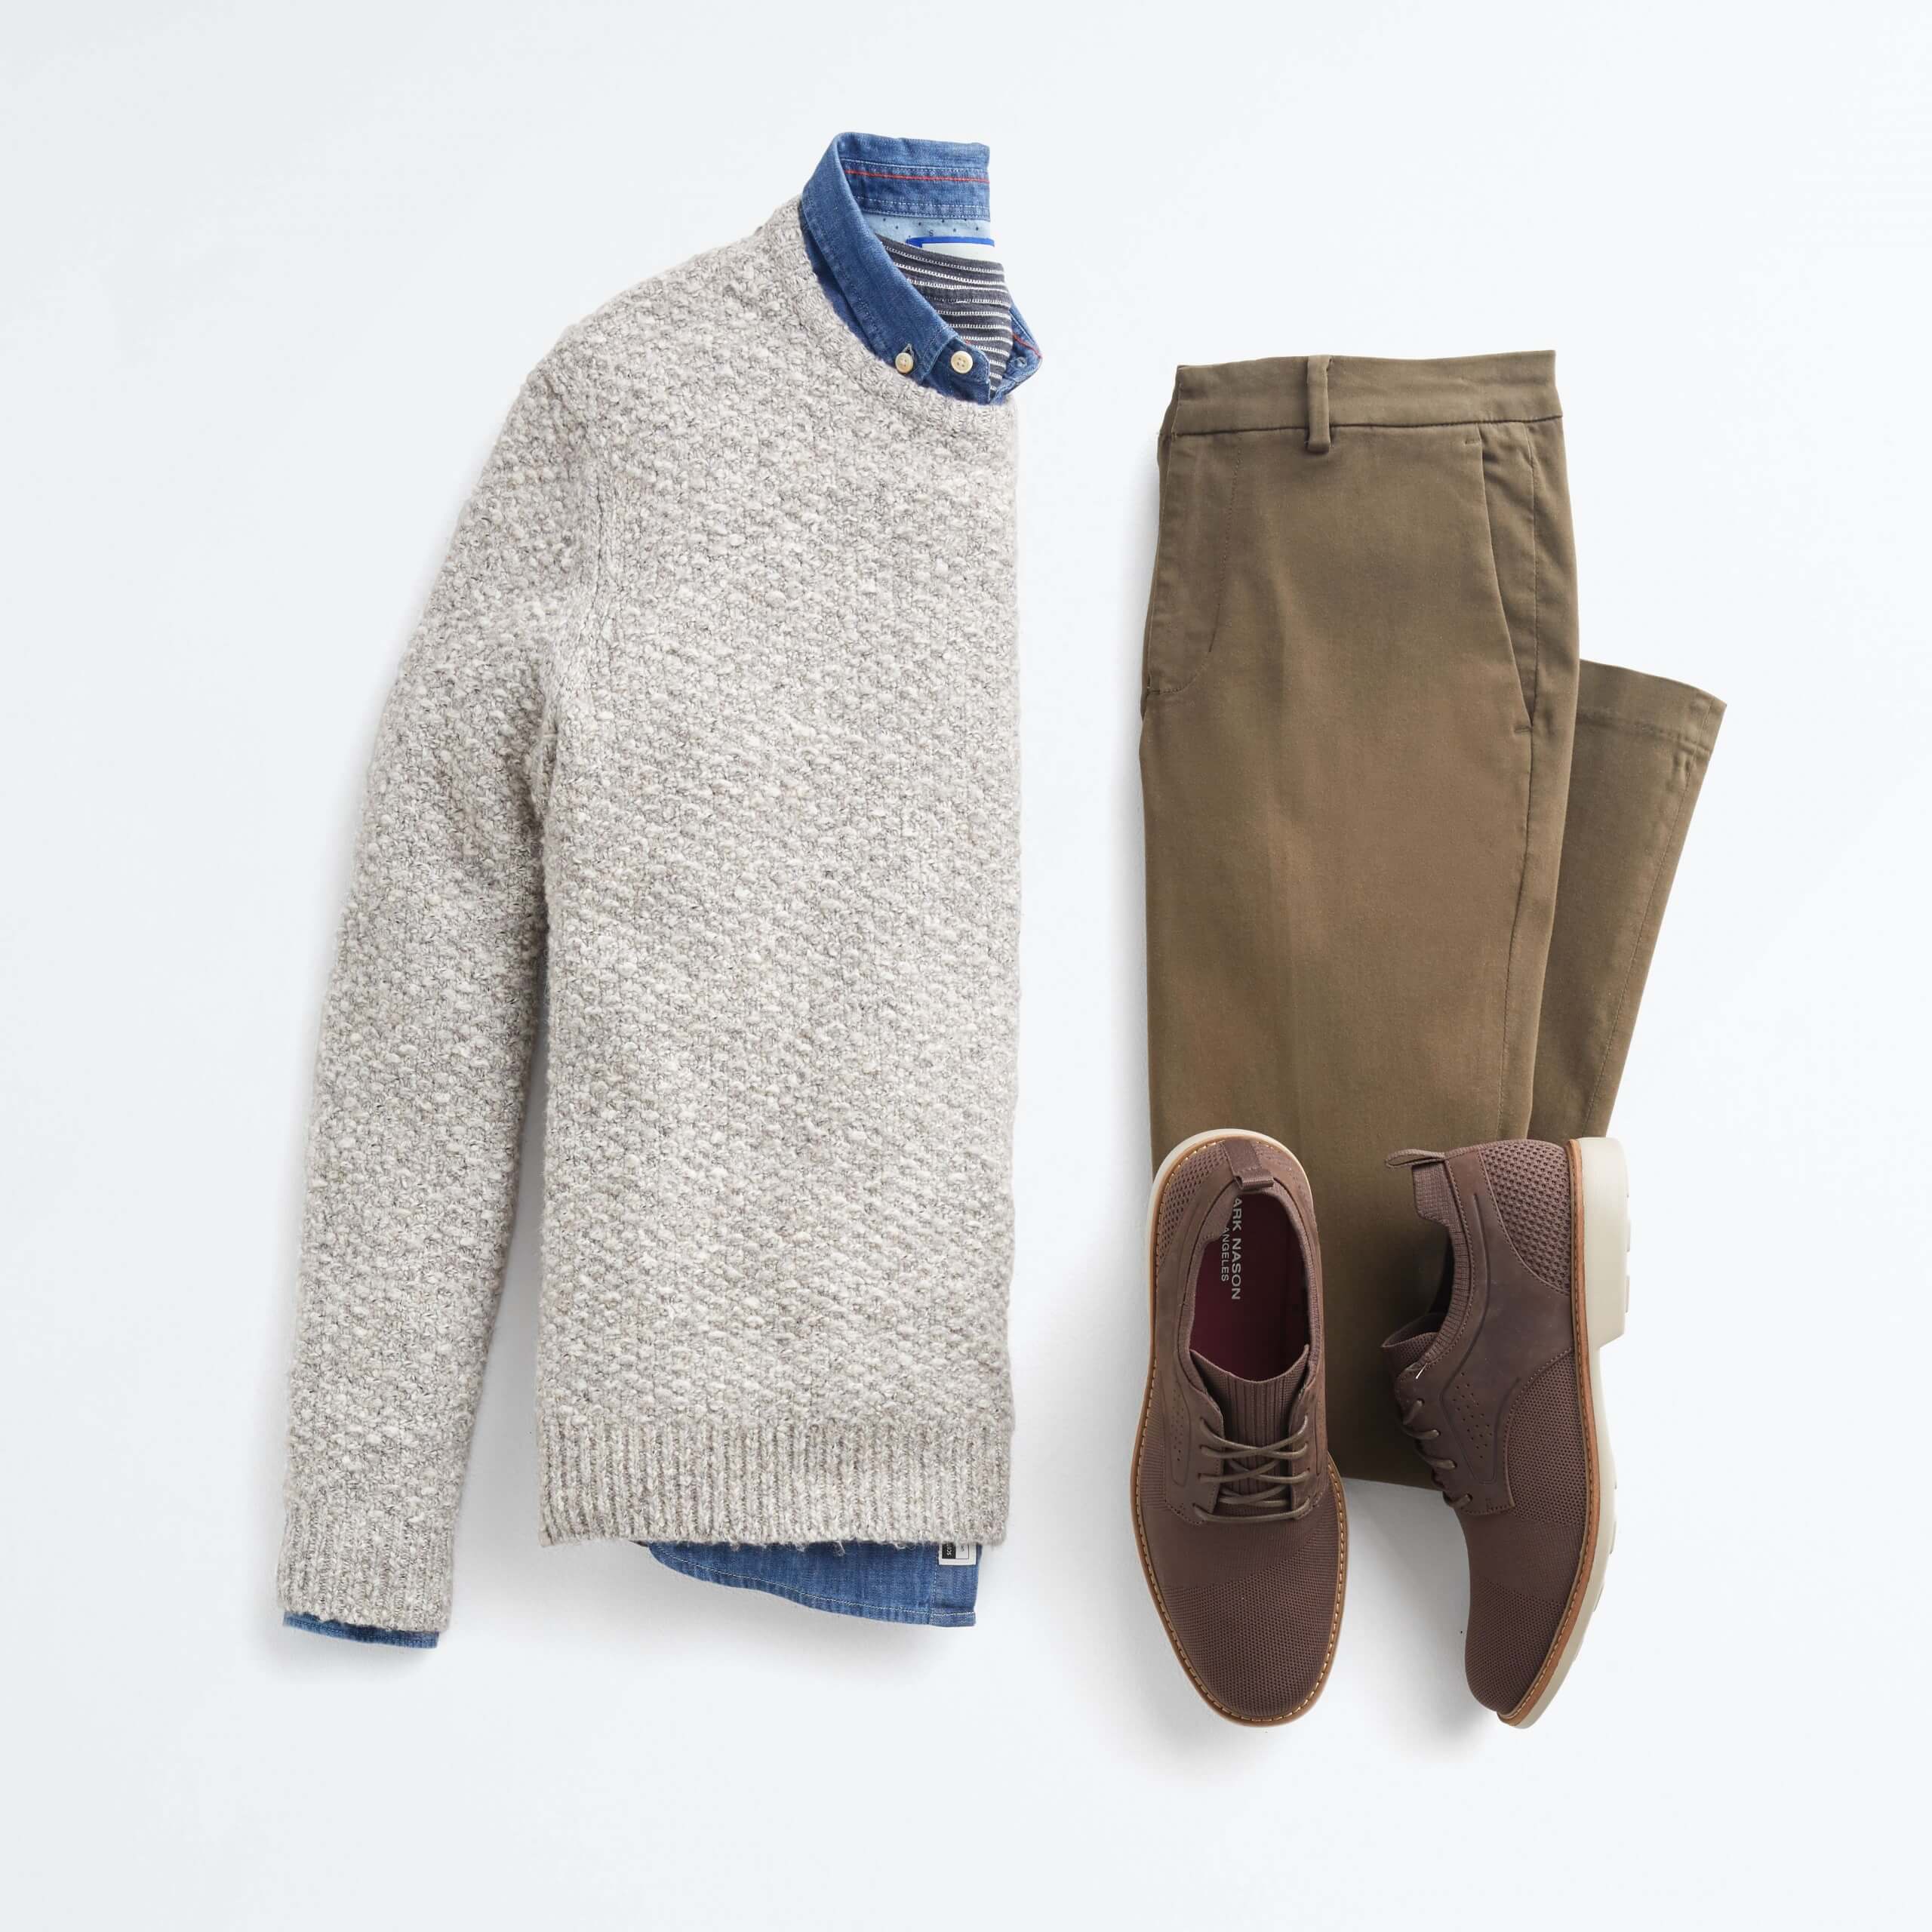 What do guys wear at a “smart casual” attire dinner party? | Stitch Fix Men